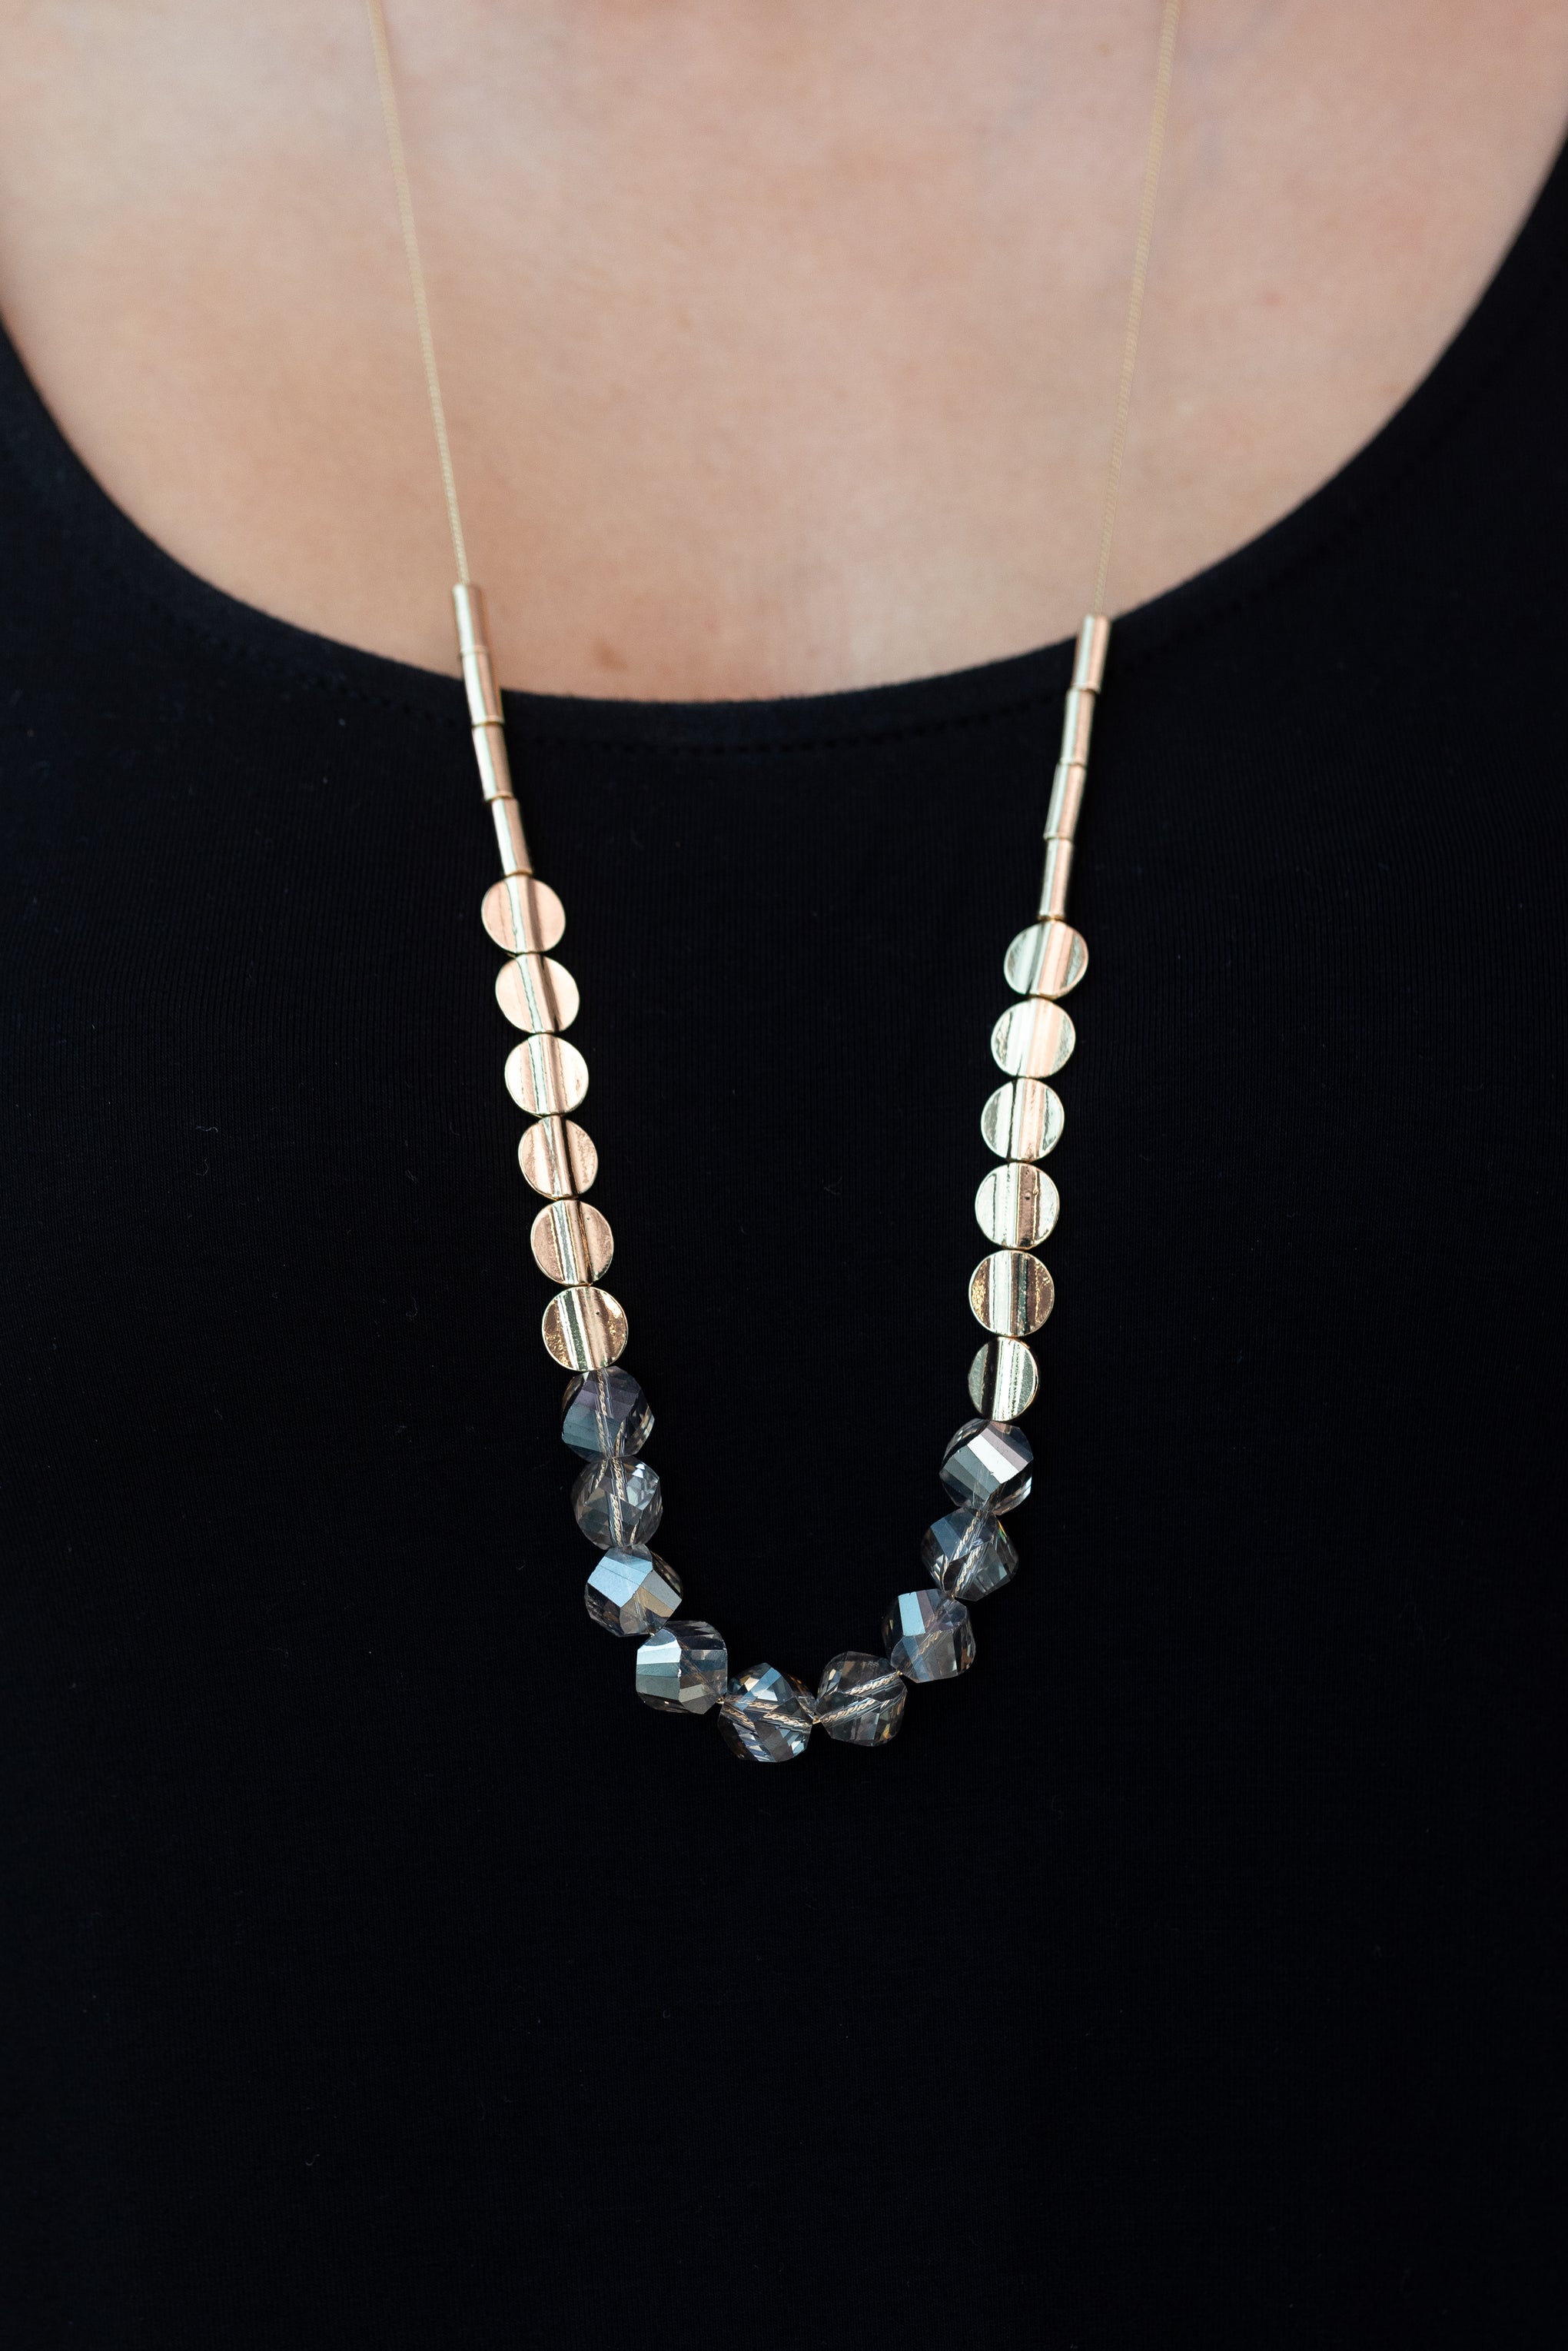 Bead and Metal Necklace in Grey